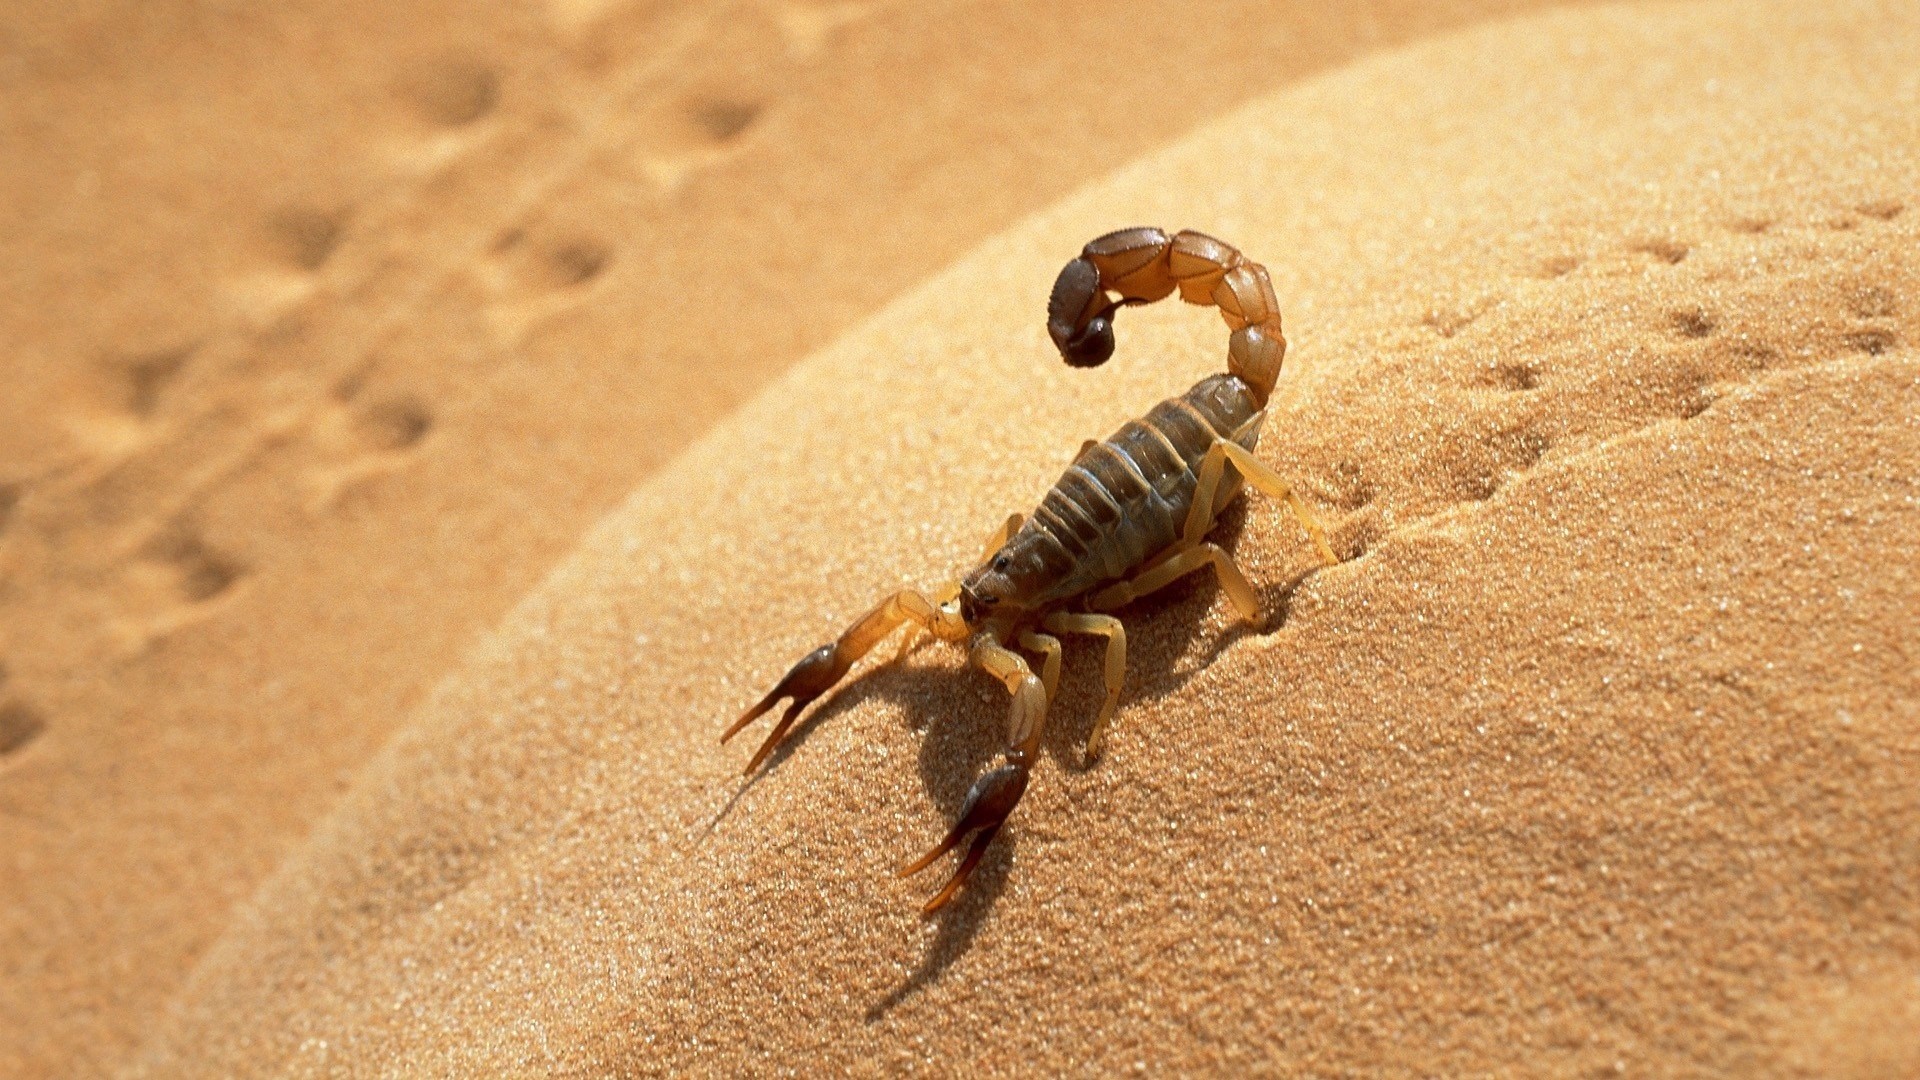 High Quality Insect Wallpaper Wpt740785 - Scorpion Desert , HD Wallpaper & Backgrounds